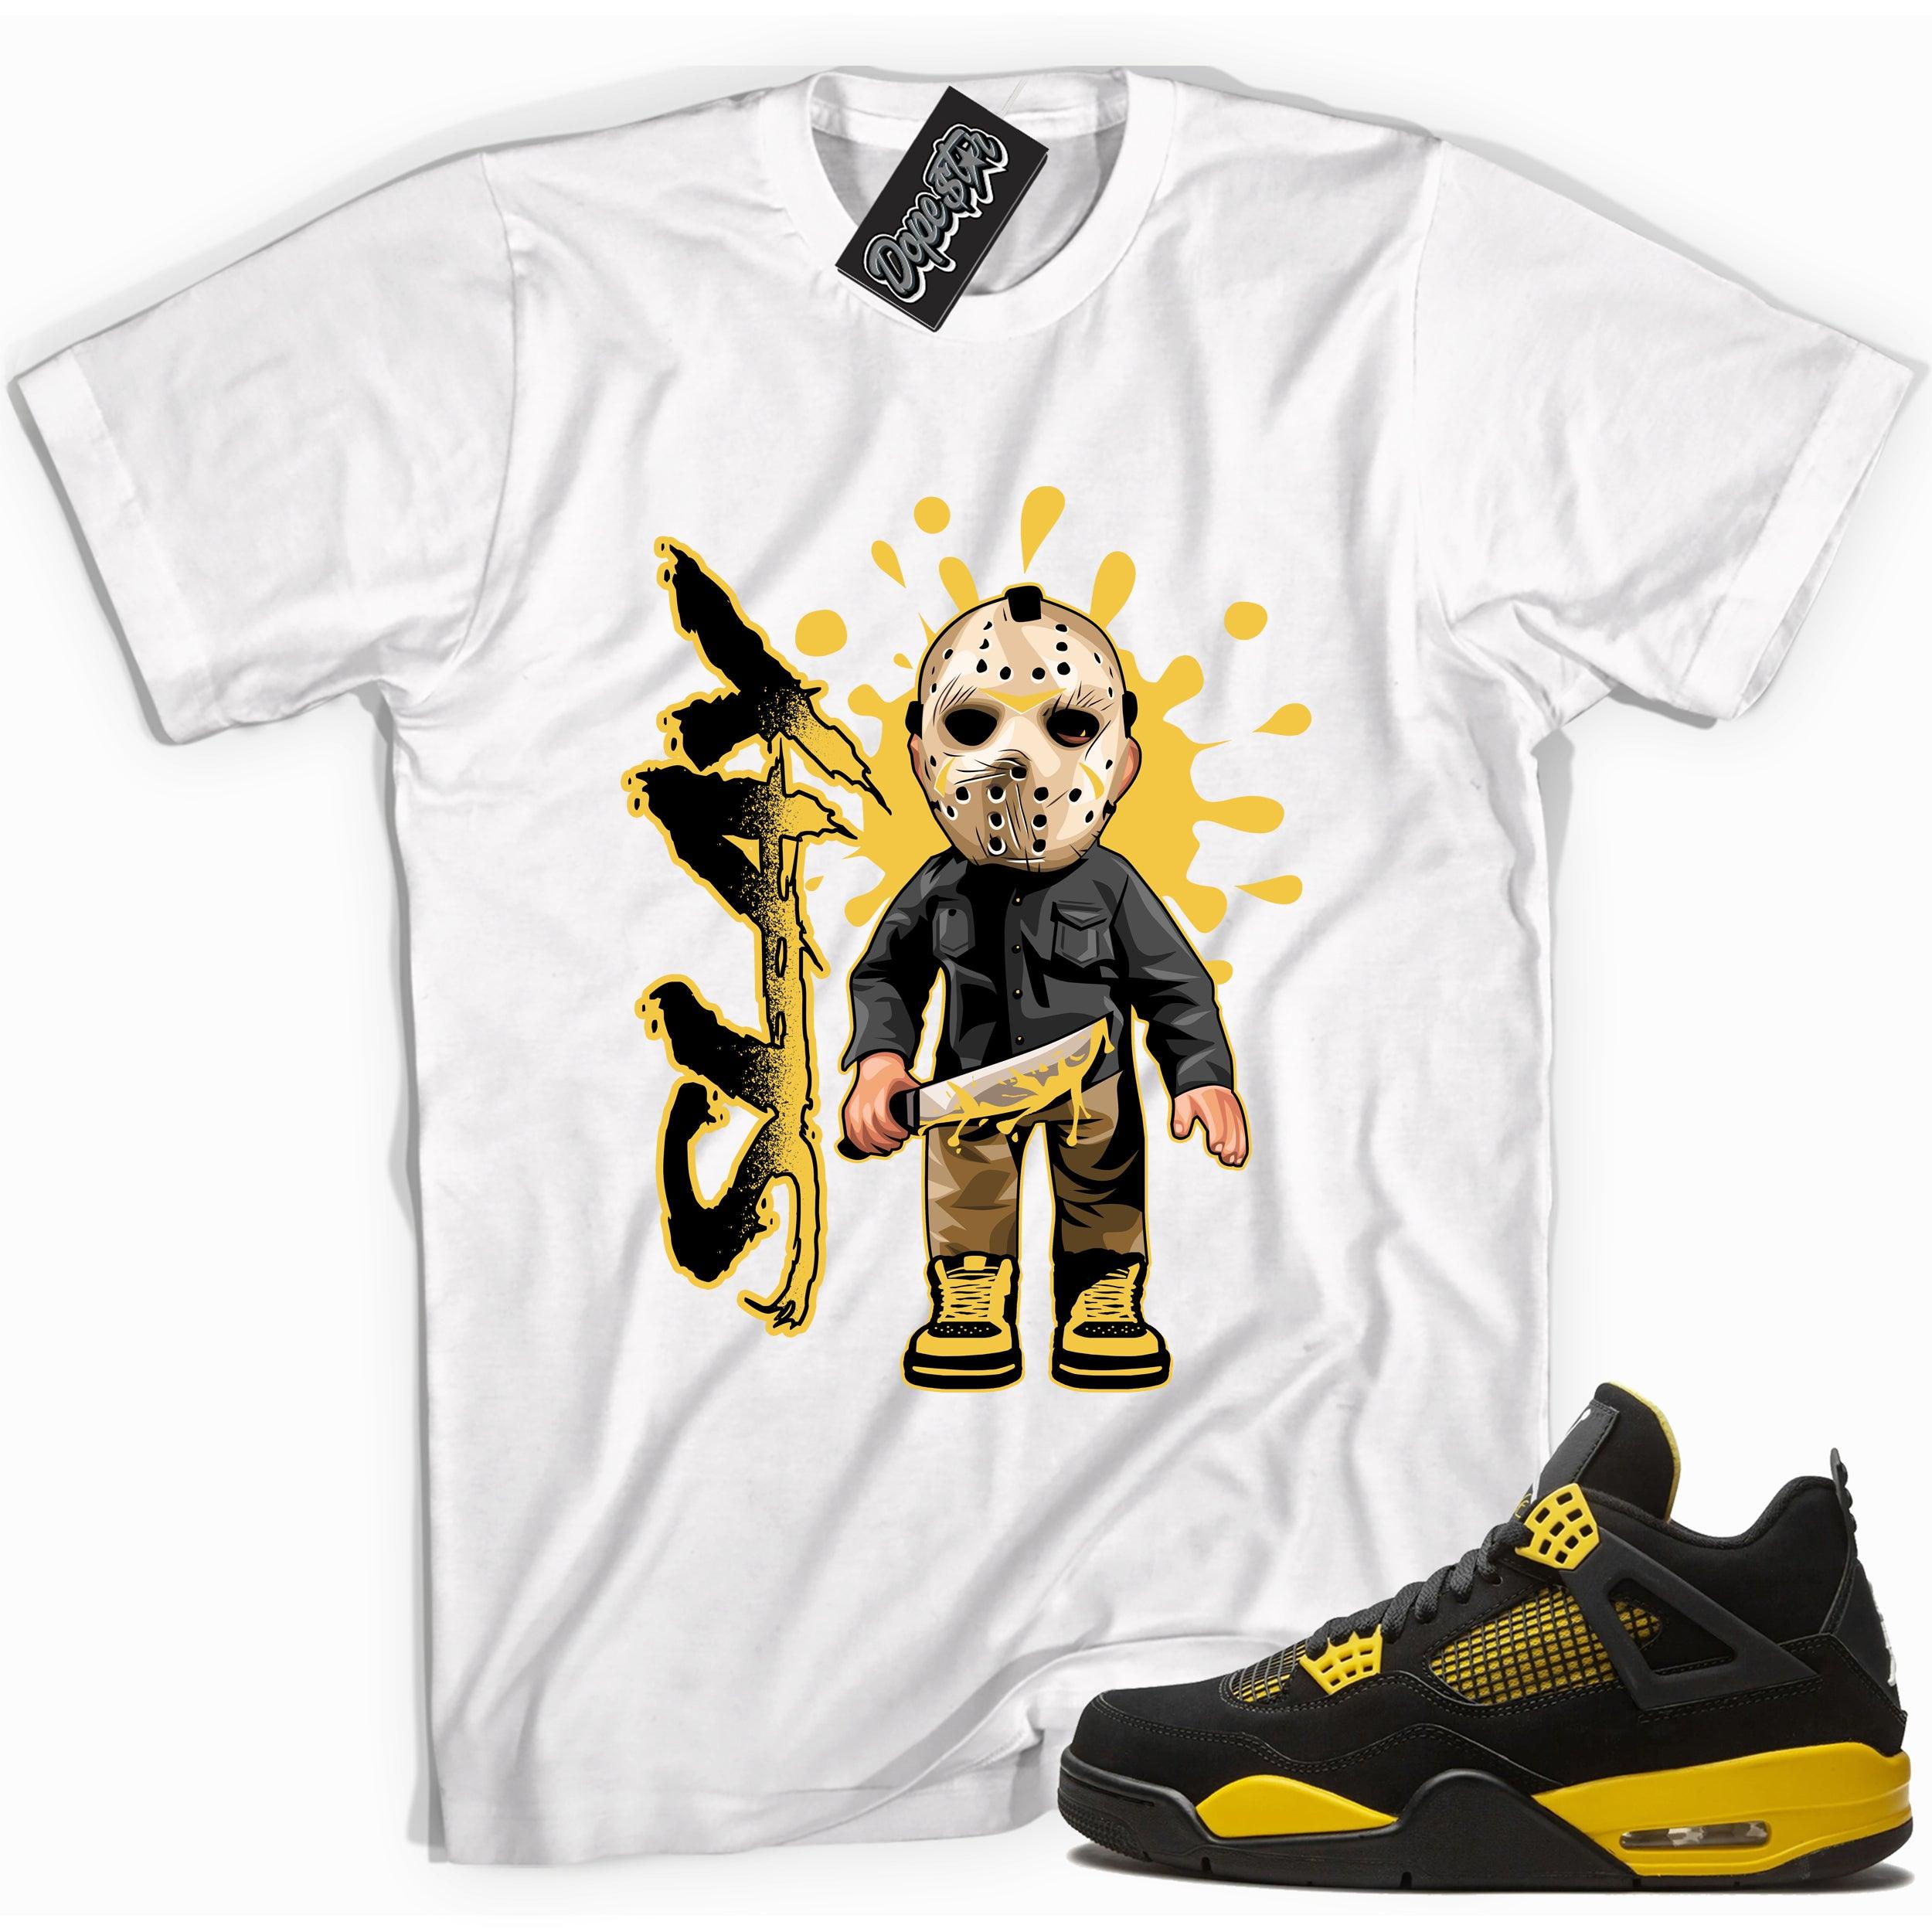 Cool white graphic tee with 'slay' print, that perfectly matches Air Jordan 4 Thunder sneakers